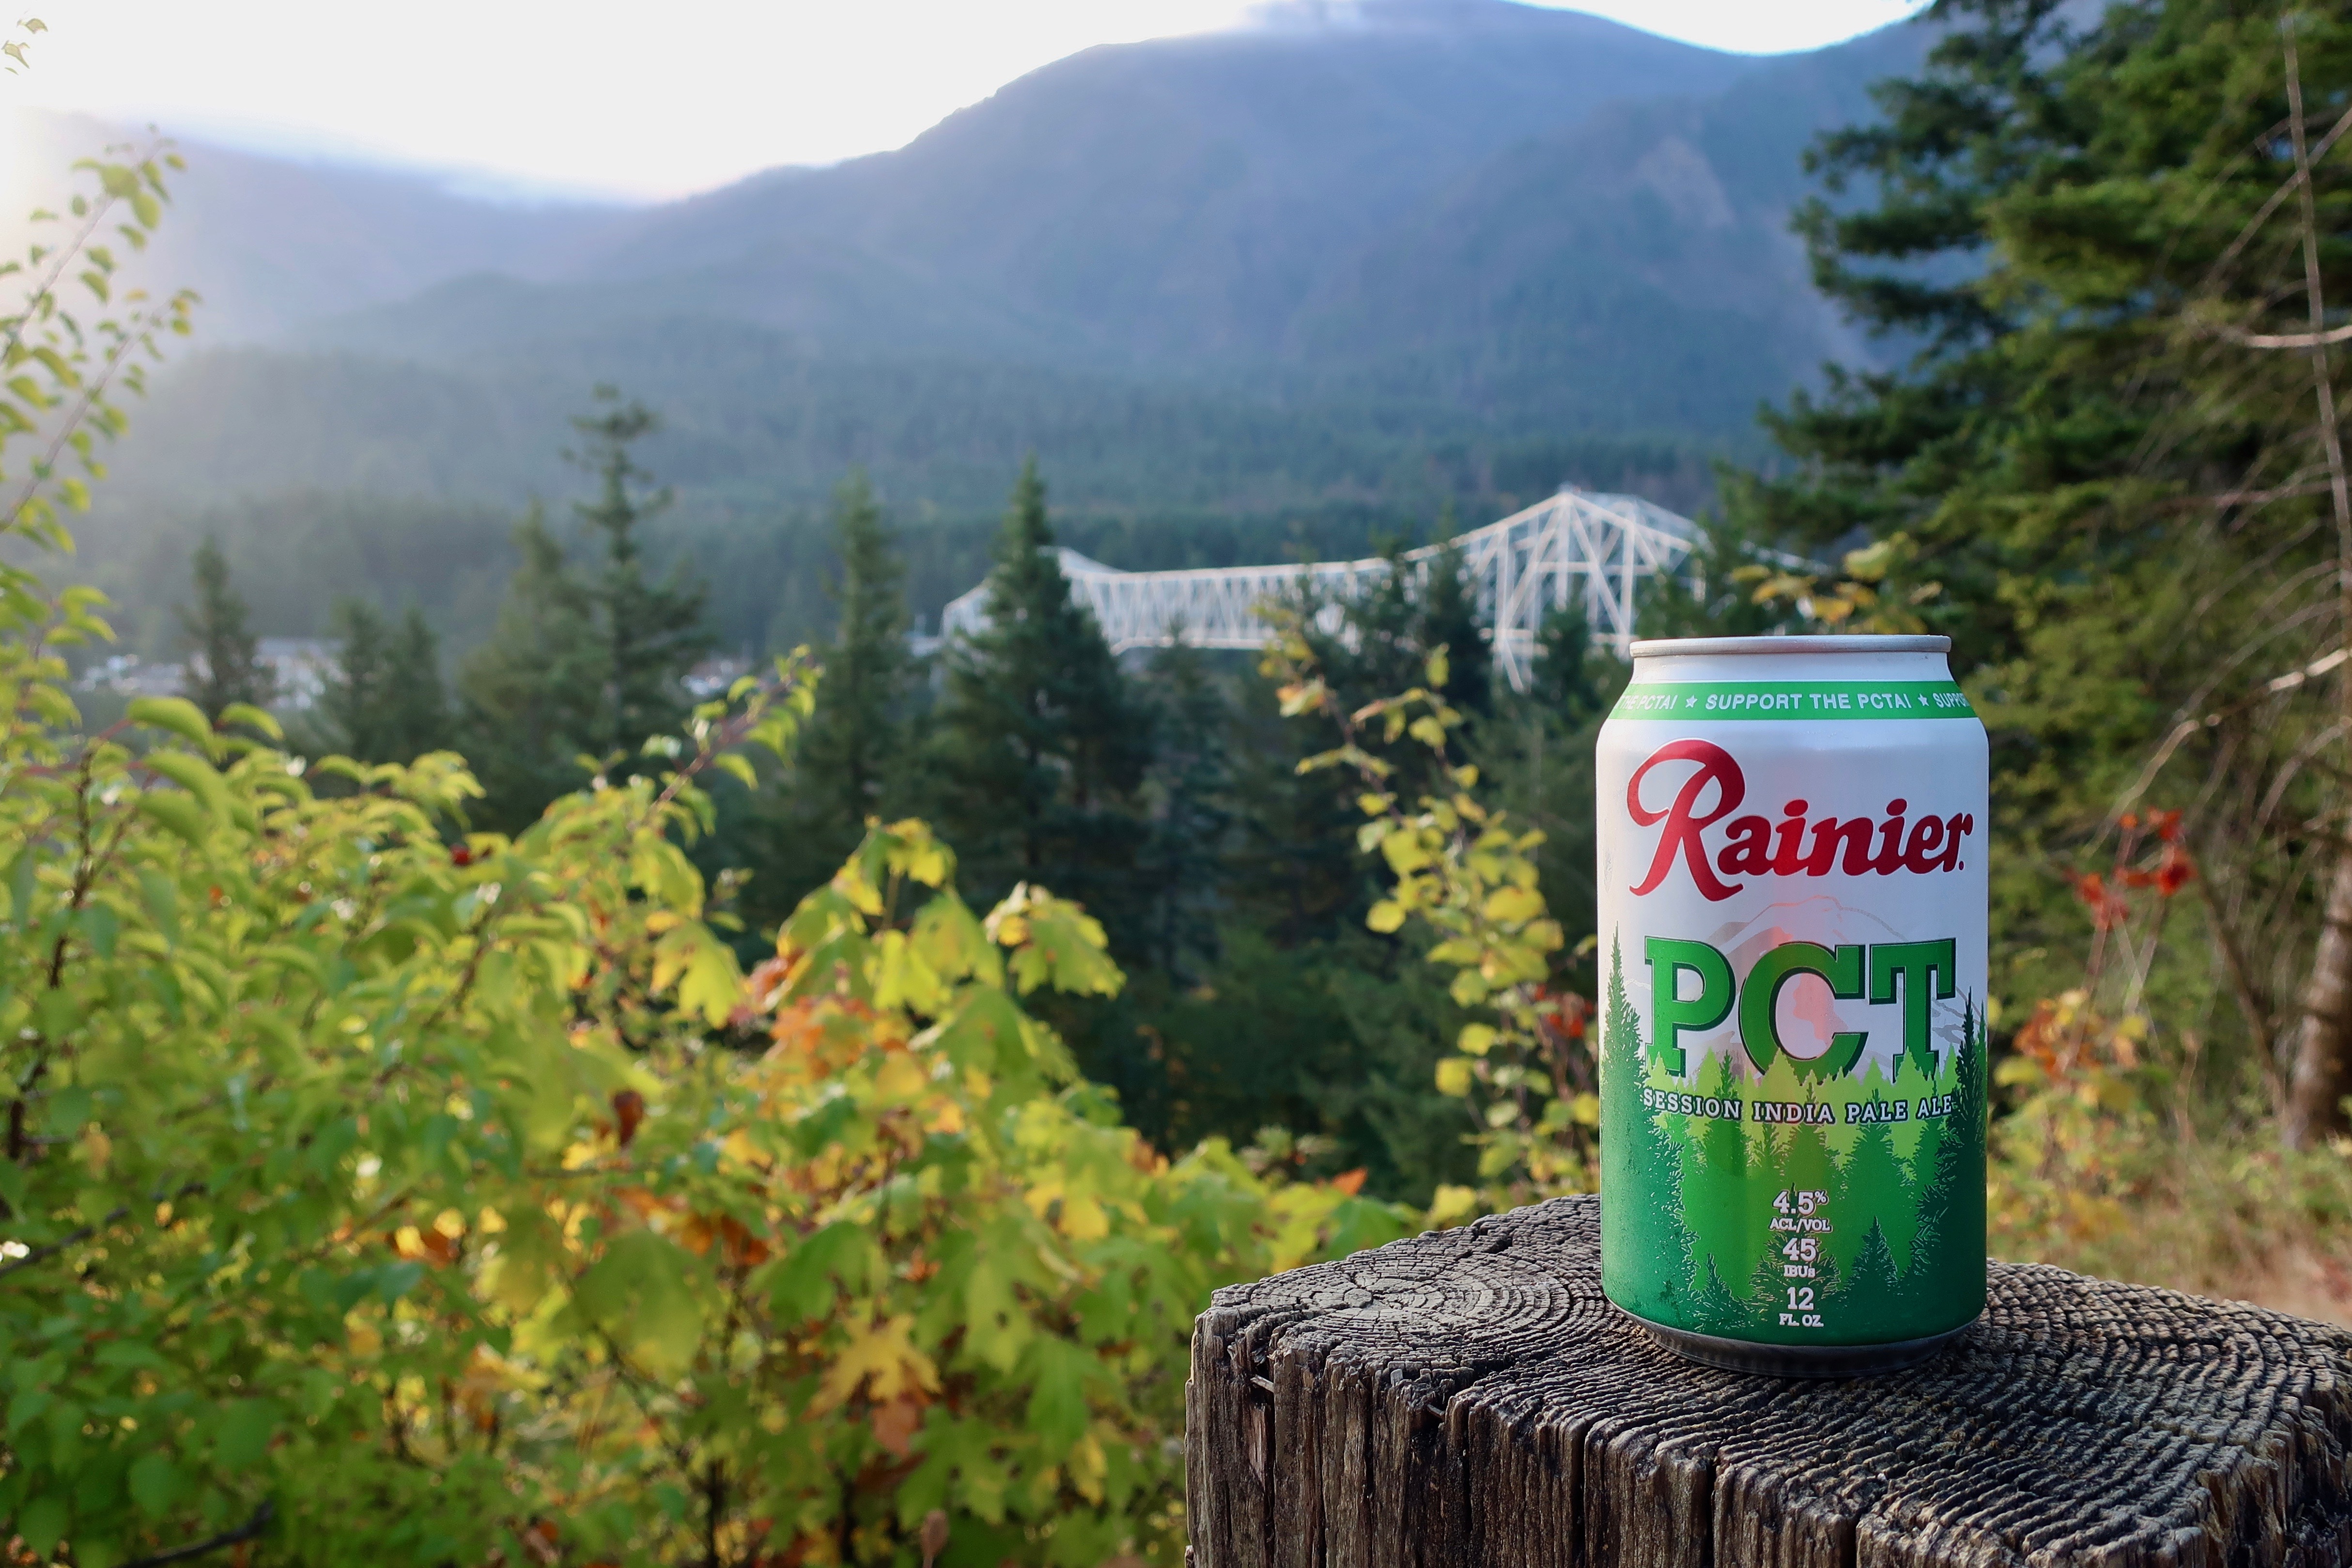 A can of Rainier PCT Session IPA with the famous Bridge of the Gods in the background.